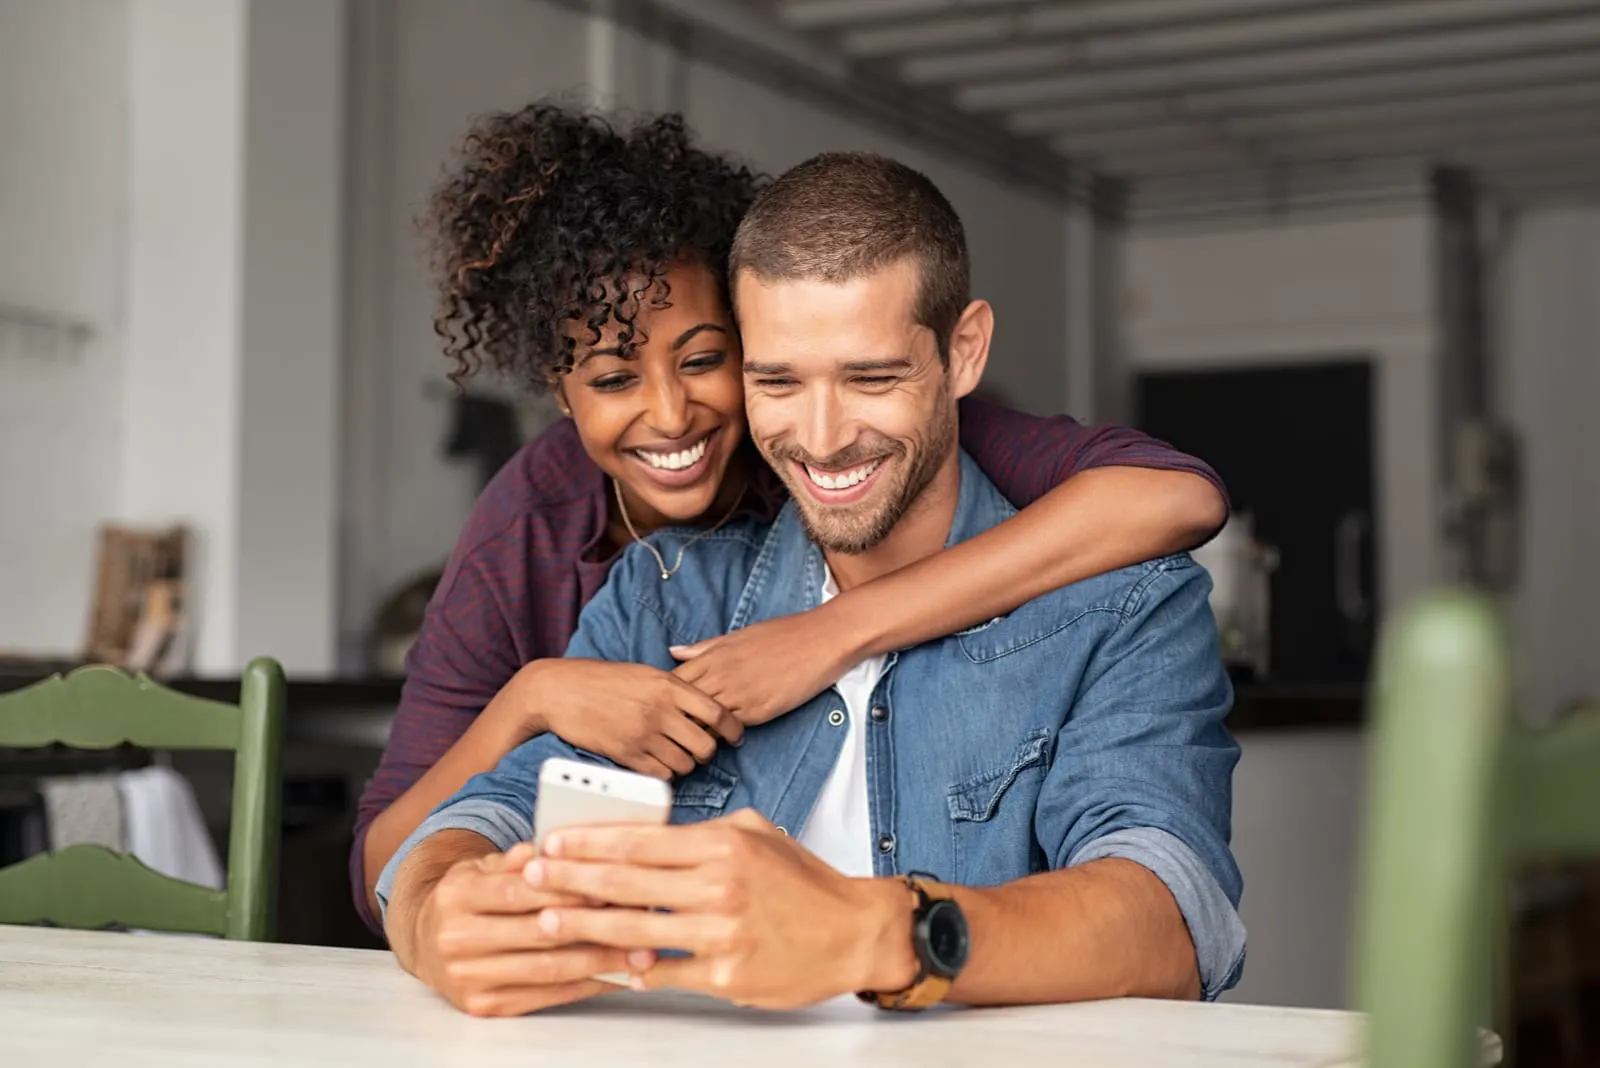 Smiling young couple embracing while looking at smartphone